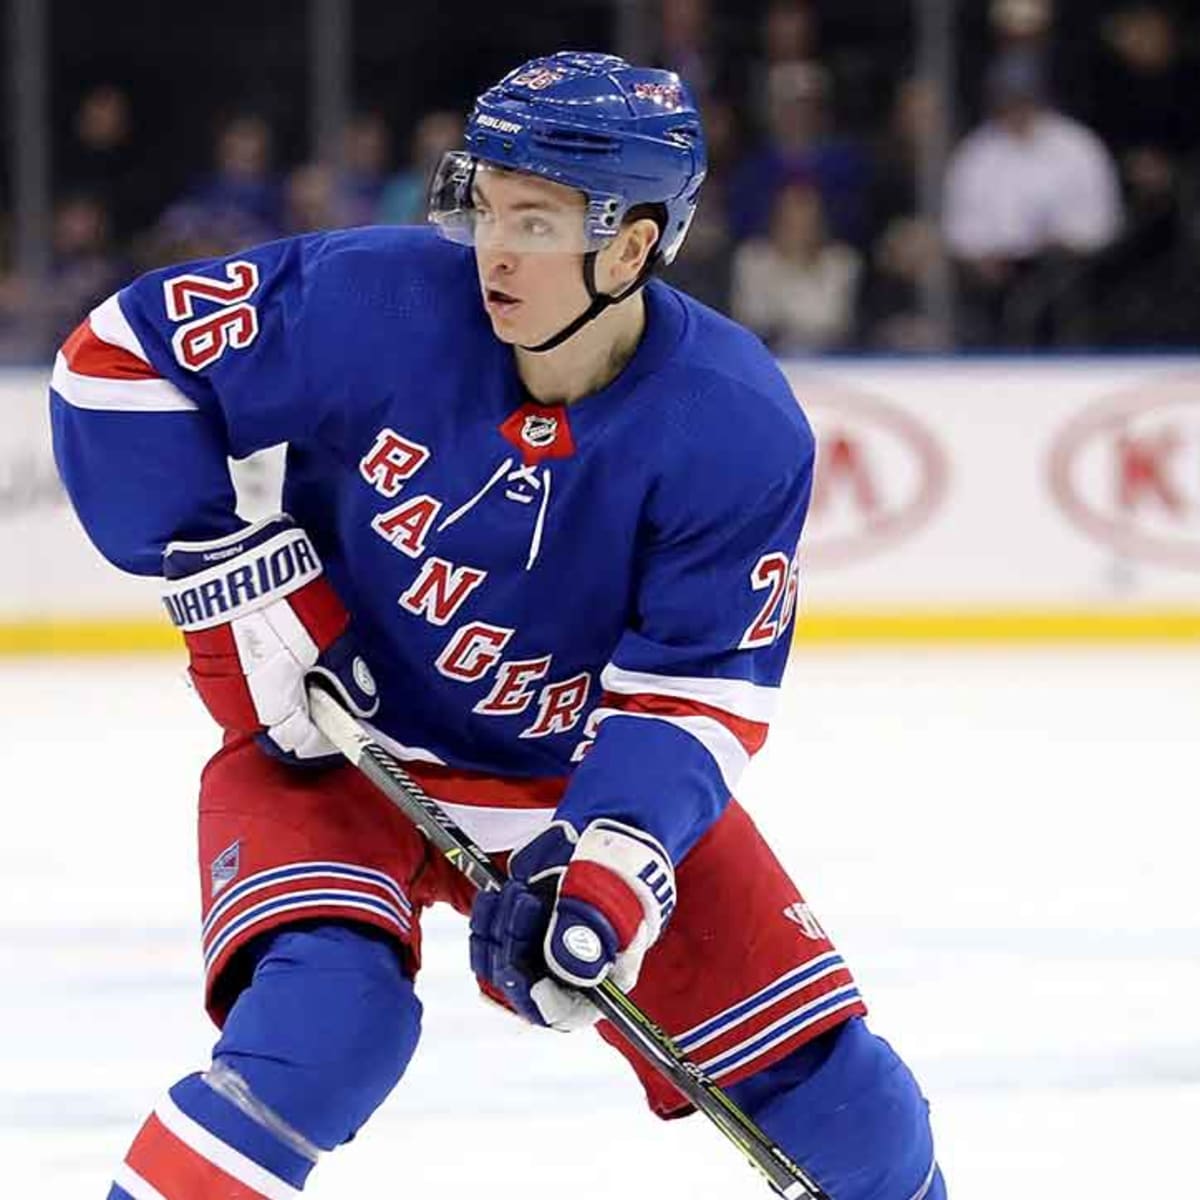 Jimmy Vesey has found home with Rangers on second go-around